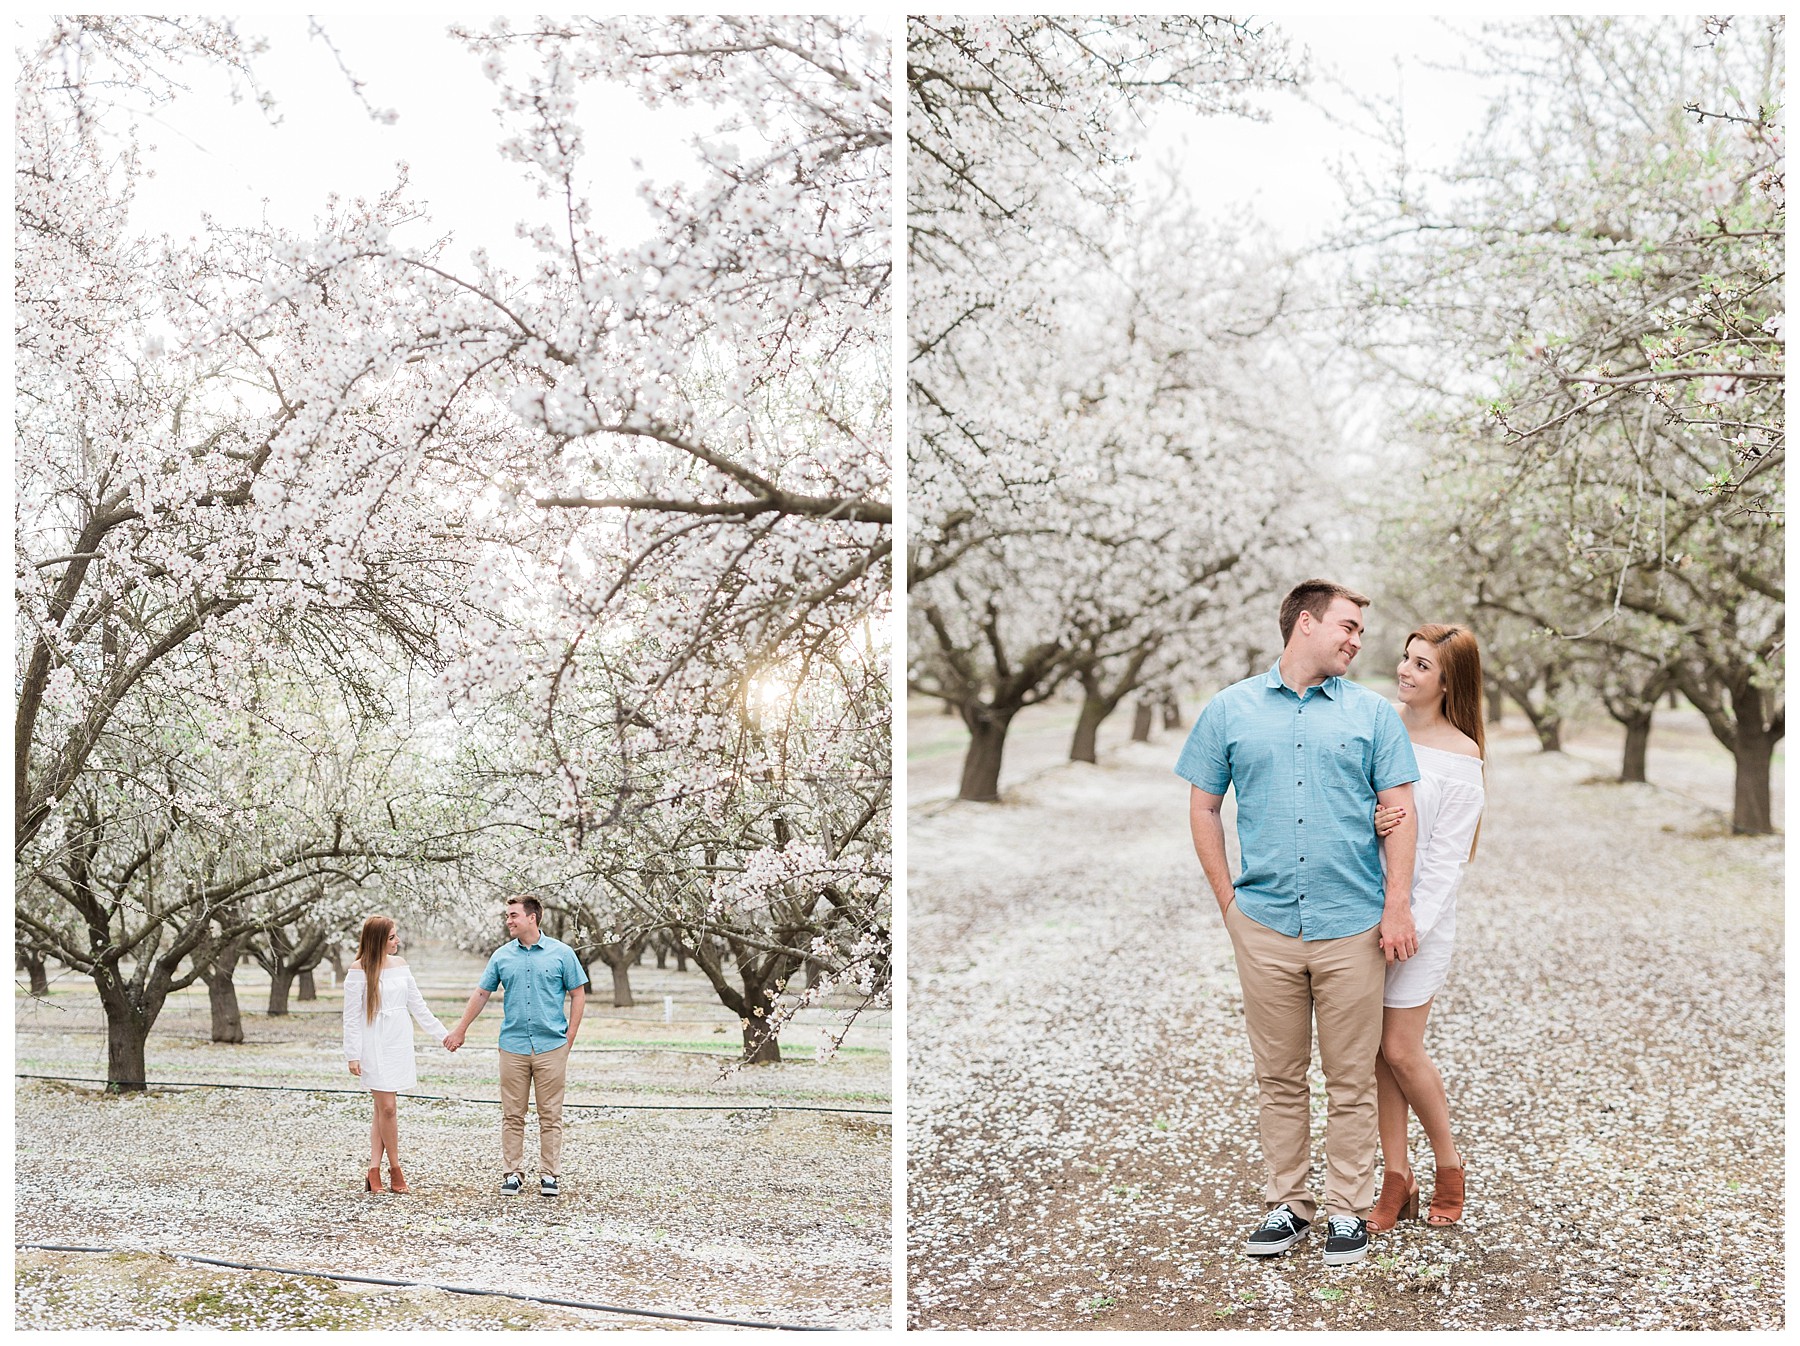 Almond Blossom Engagement Photography